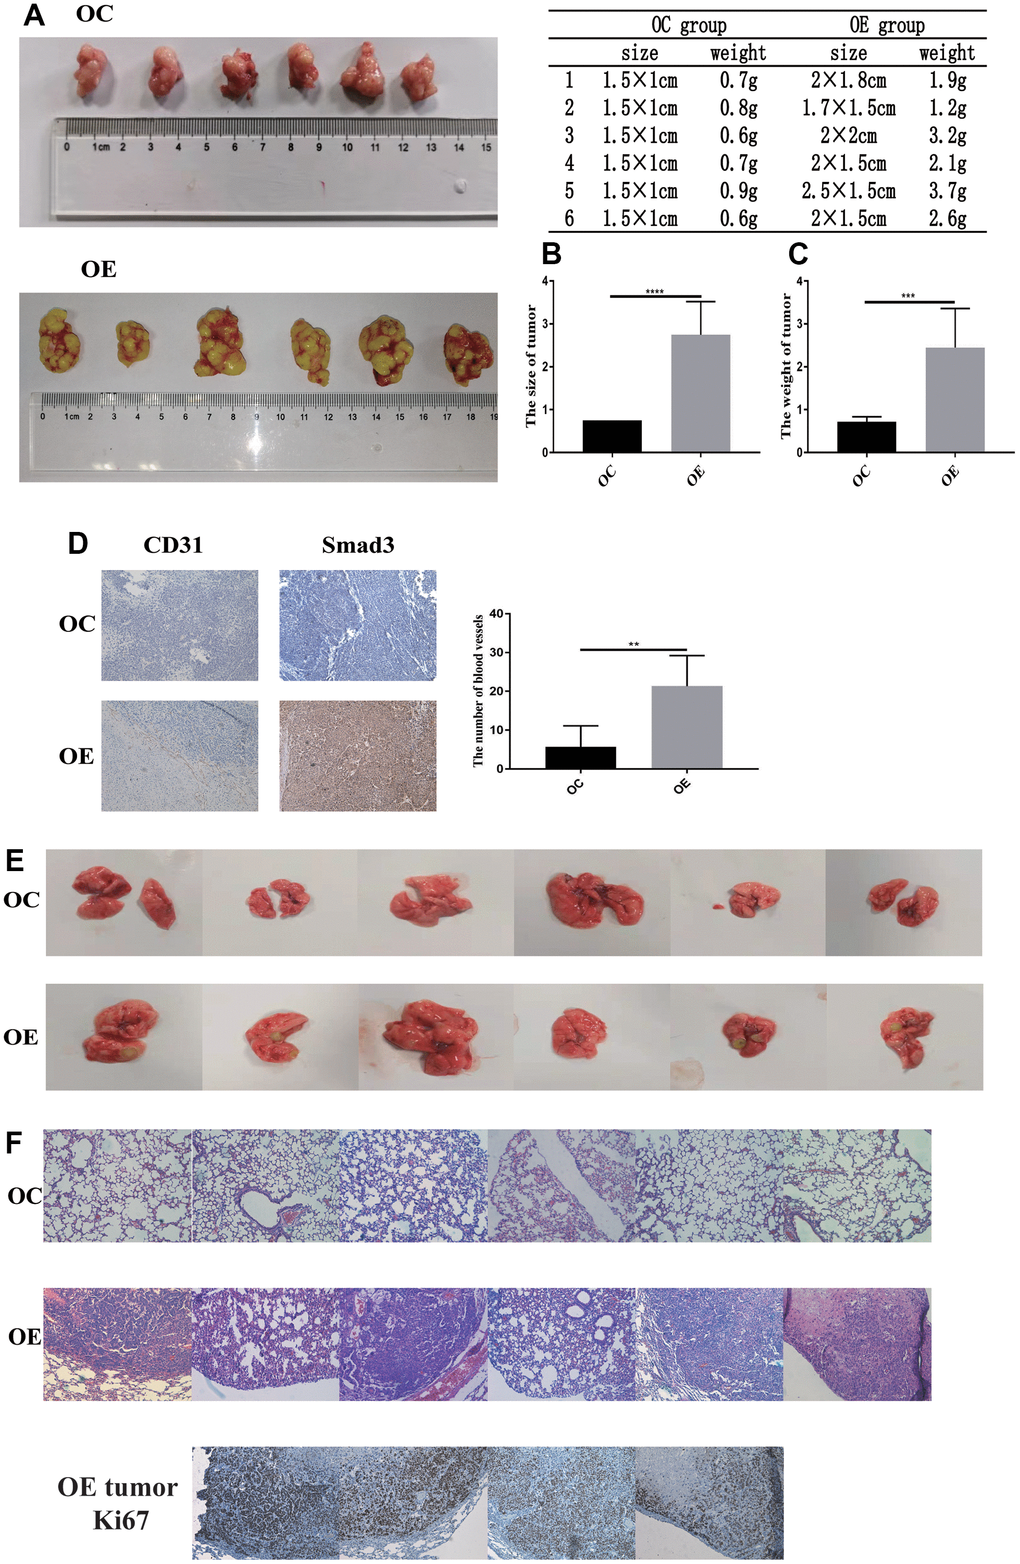 PFN2 promotes tumor growth and metastasis in-vivo. The size and weight of tumor in the H446-OE group is significantly higher than those of tumor in the H446-OC group in xenograft mice model (A–C). There is a significantly higher number of blood vessels in tumor in the H446-OE group than in that in the H446-OC group; meanwhile, Smad3 expression is higher in the H446-OE group than in H446-OC group (D). H446-OE cells could remarkably promote metastasis in vivo (E), confirmed by hematoxylin and eosin staining (F); the number of Ki67 positive cell in metastatic tumor in the lung is significantly higher than that in the adjacent tissues (F).